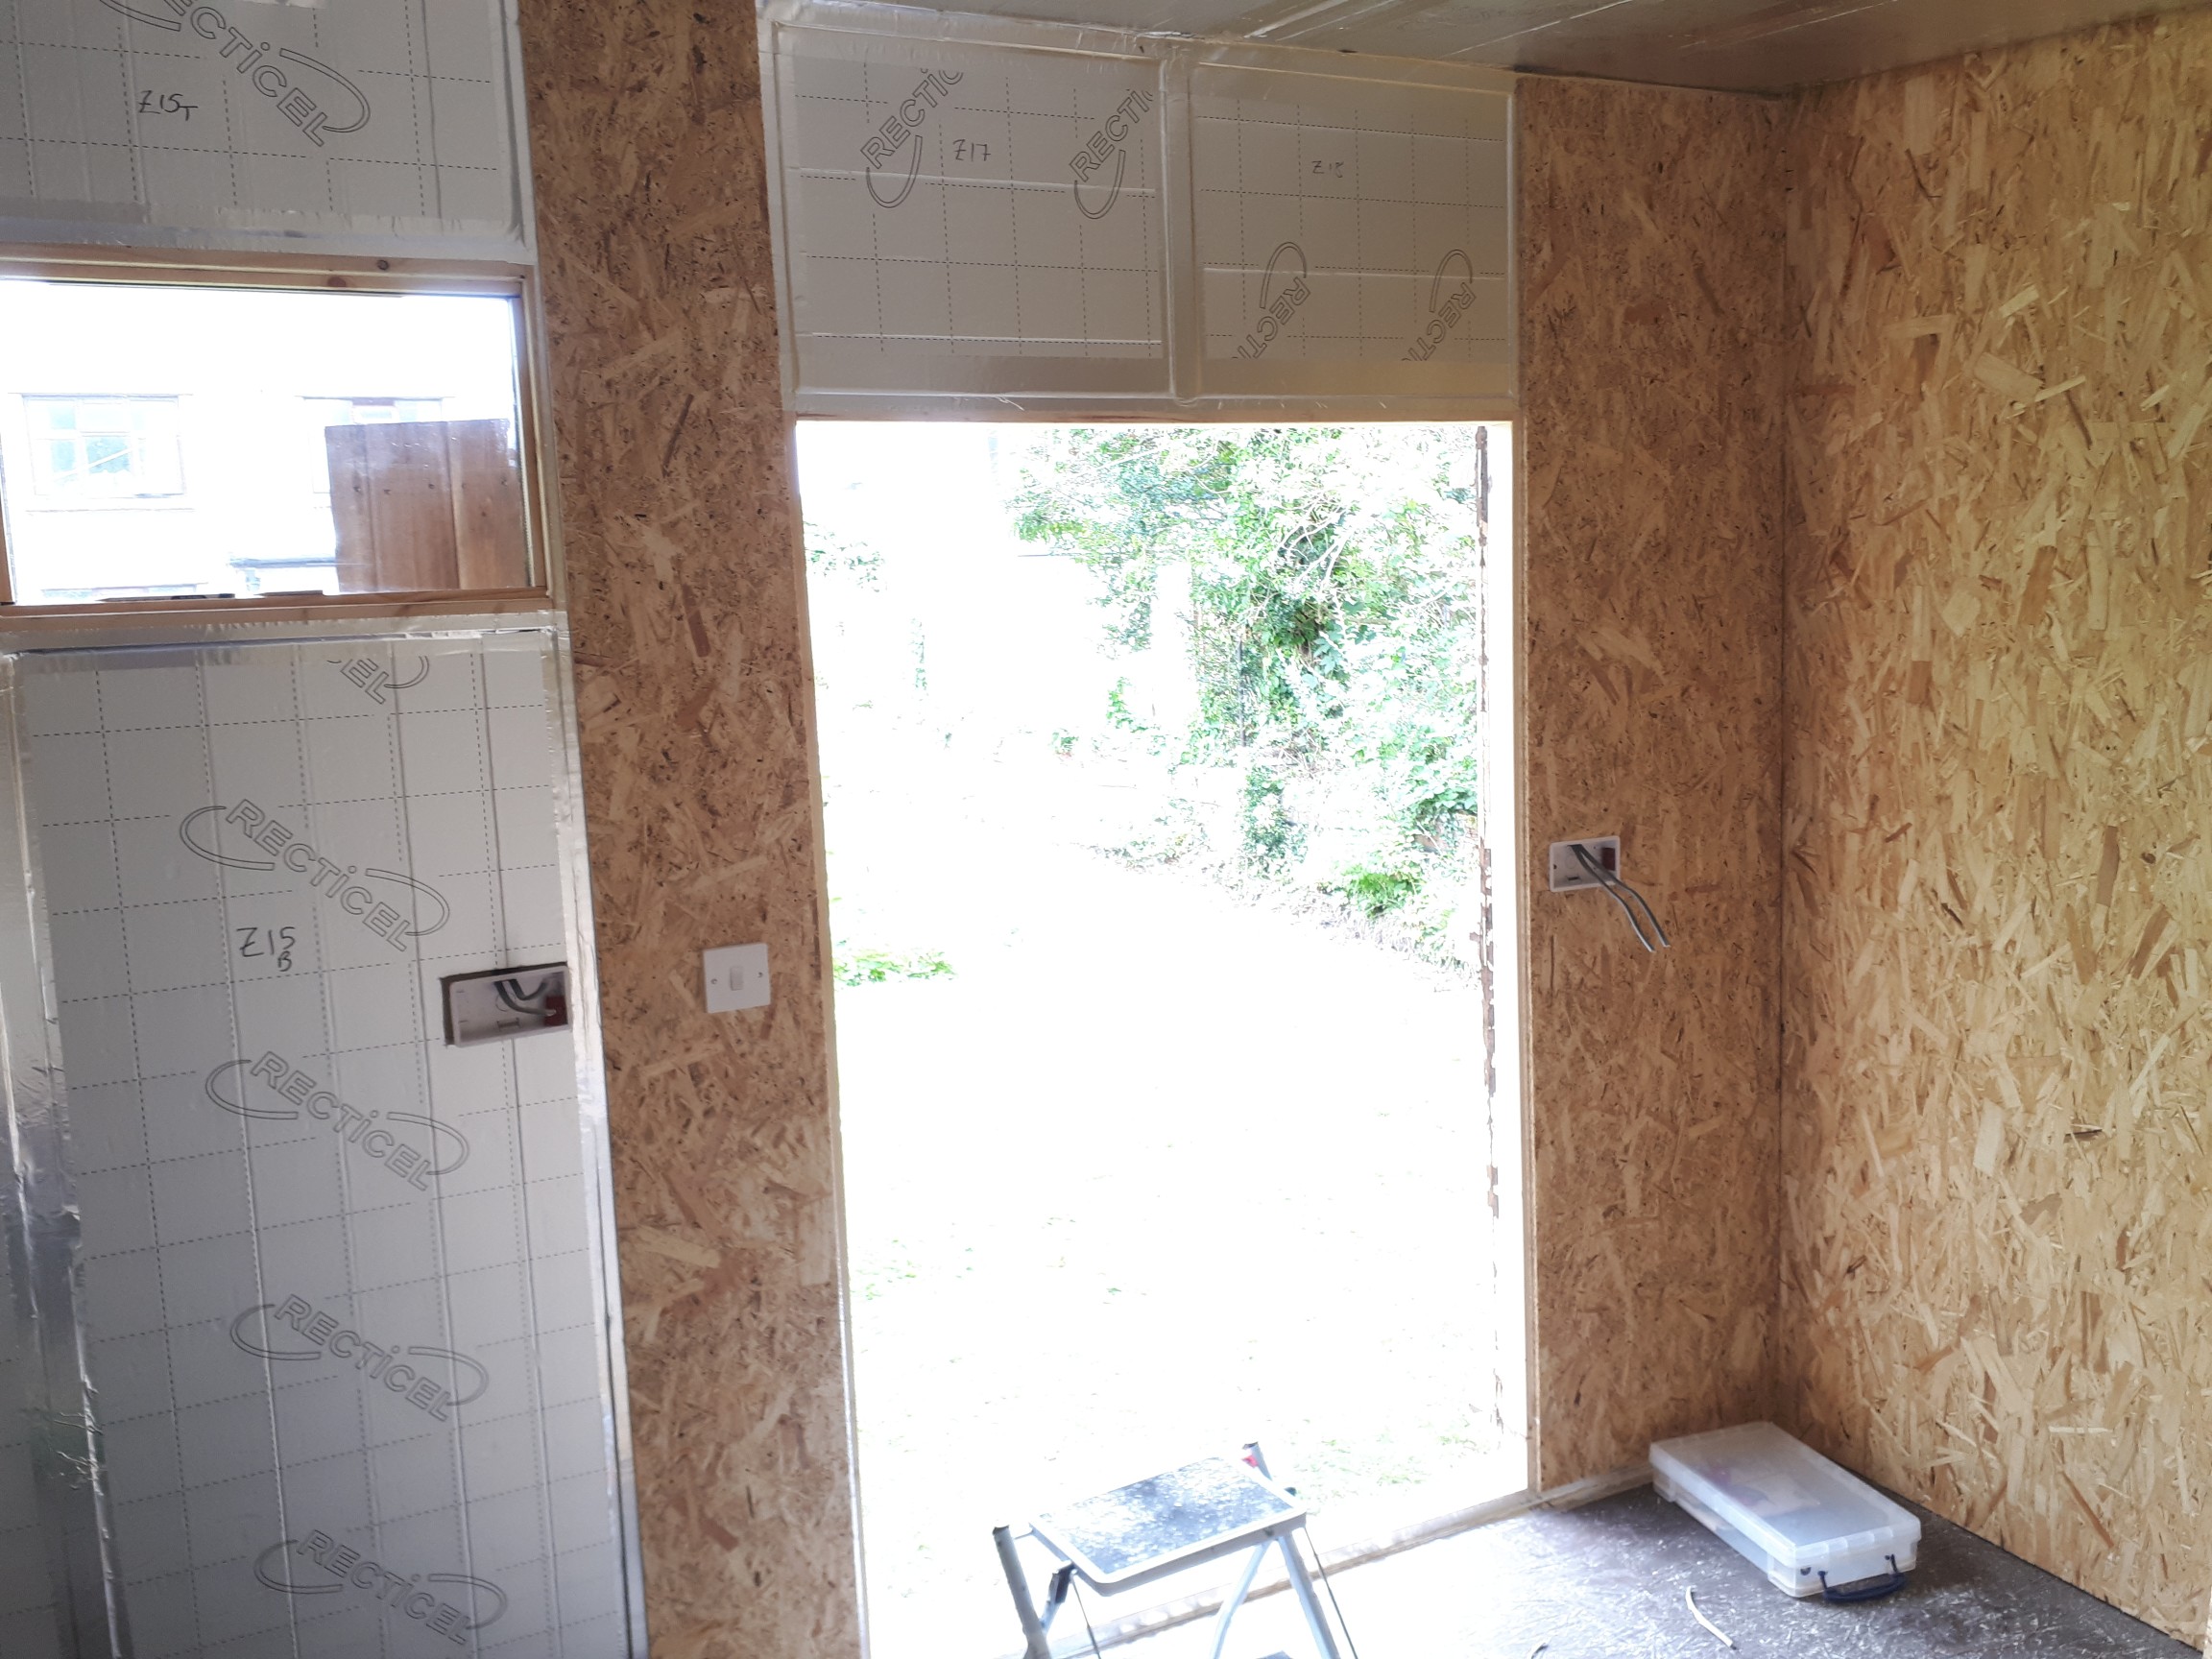 cladding the storage area in OSB